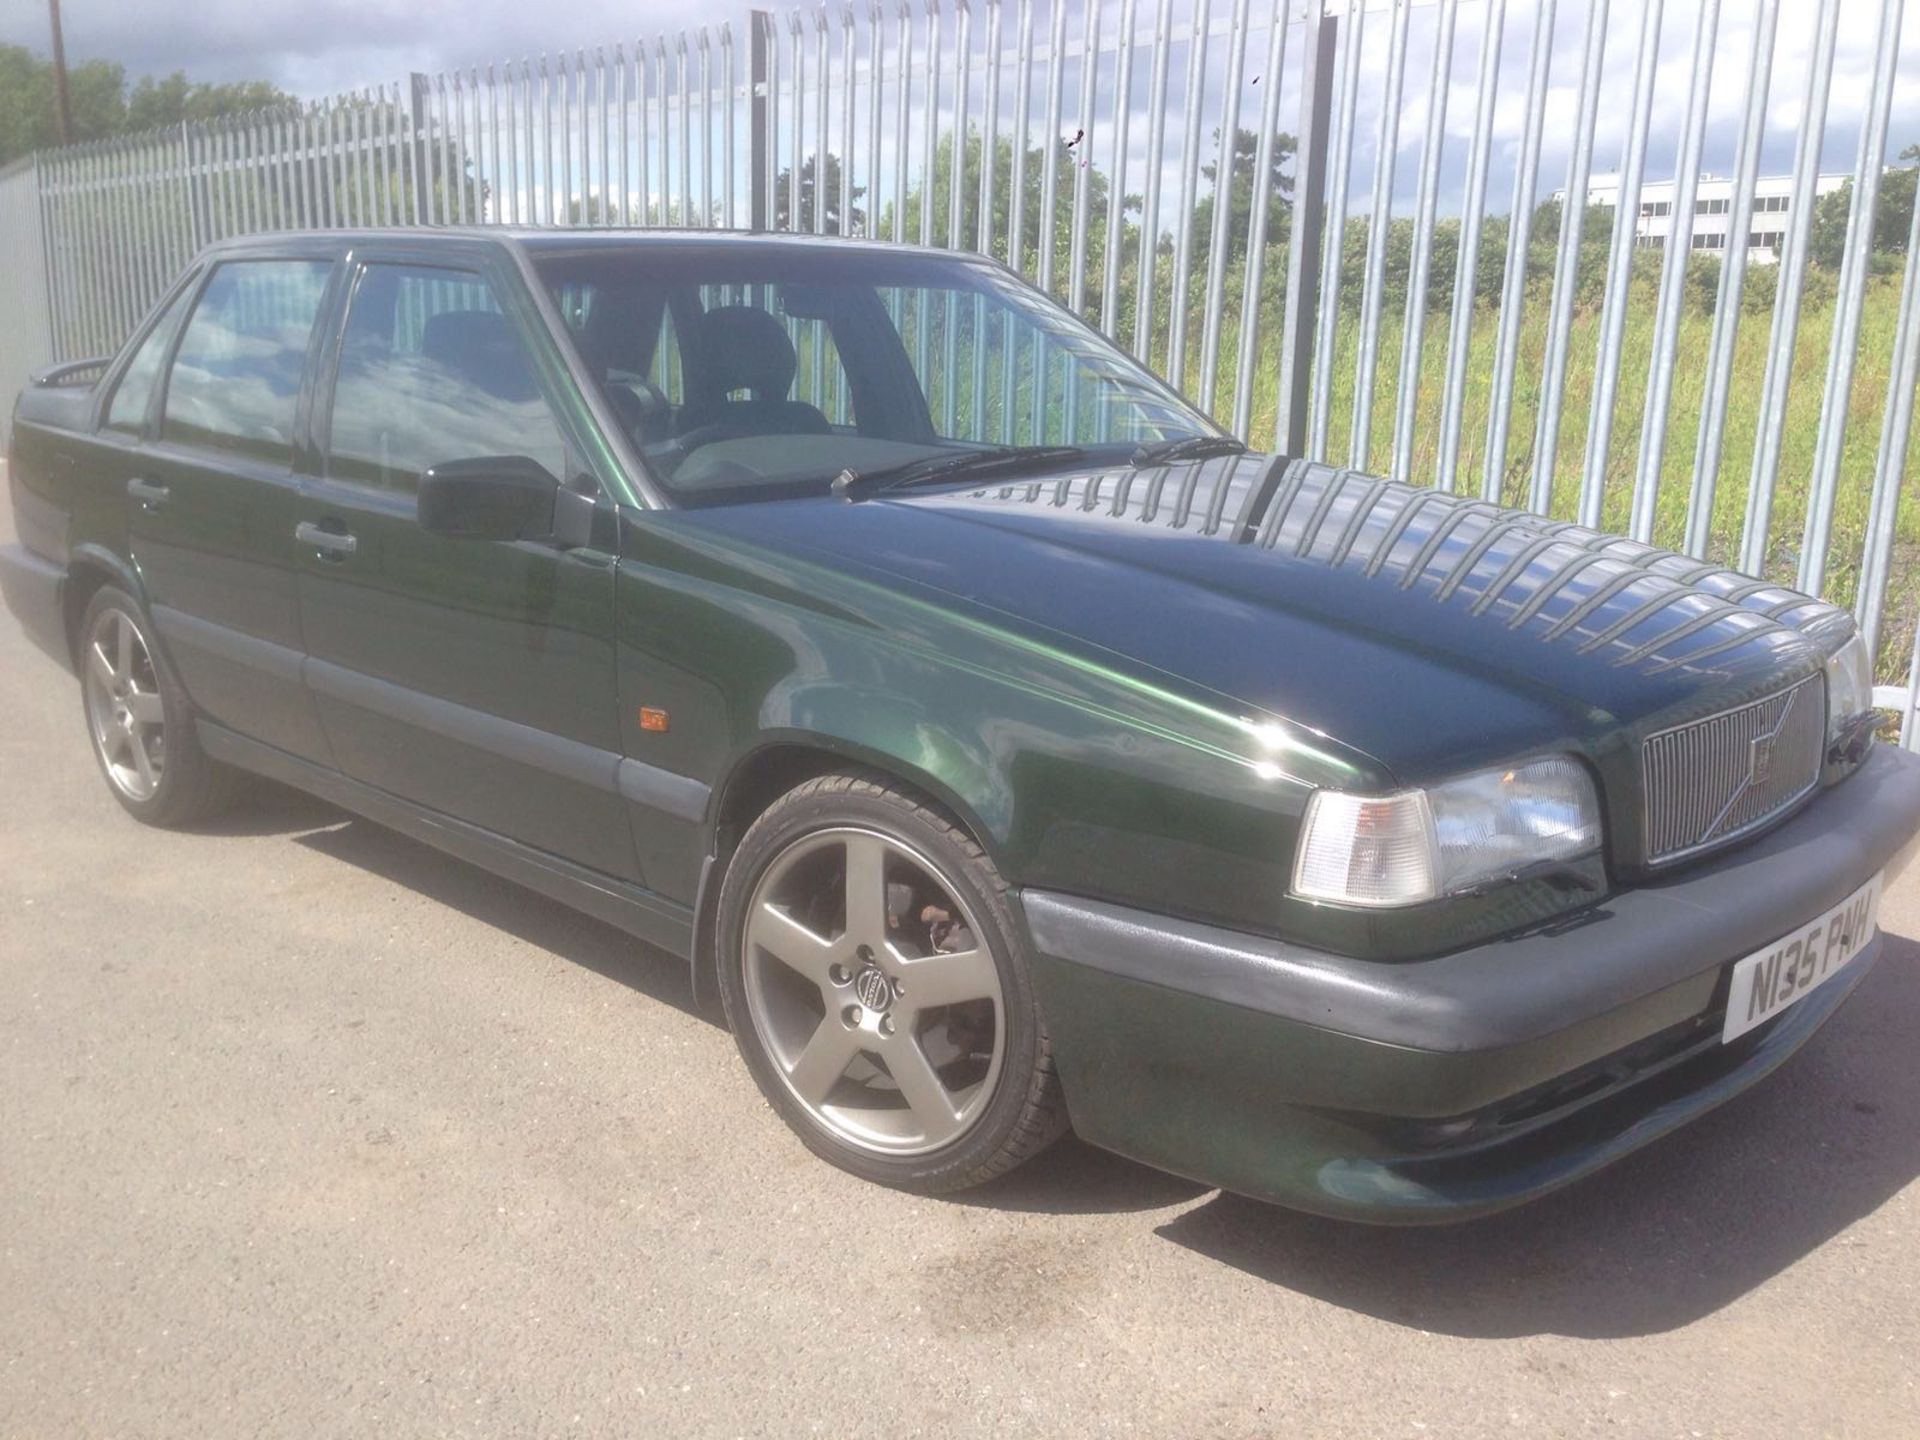 VOLVO T5-R saloon auto, 1995/N. olive green, 2 previous owners from new. - Image 6 of 20